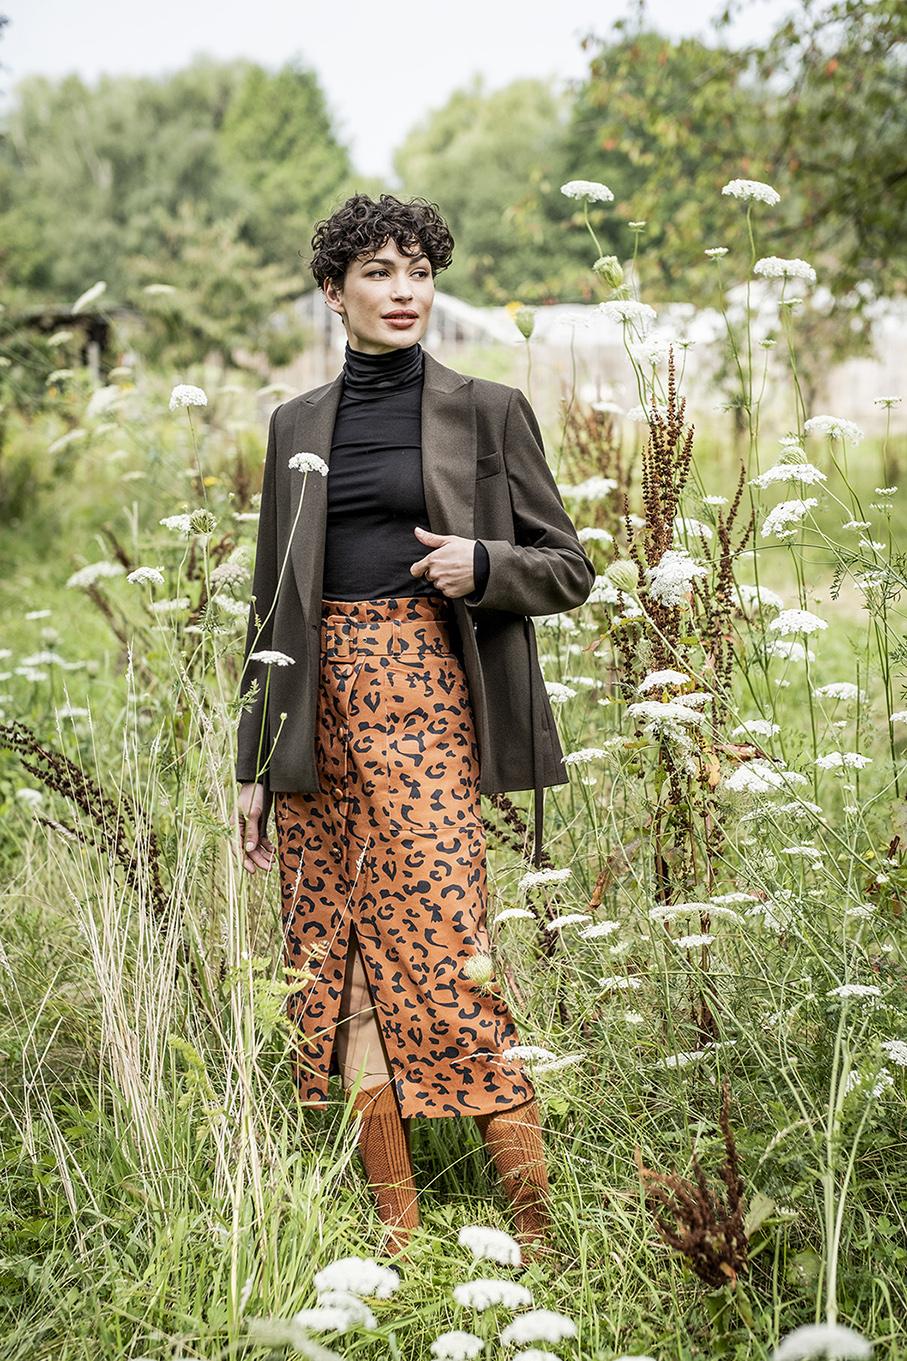 Woman wearing the Alida Skirt sewing pattern from Fibre Mood on The Fold Line. A skirt pattern made in cotton twill, leather, denim, corduroy or velvet fabrics, featuring patch pockets, paper bag waist, front button closure, front slit, fabric covered bel